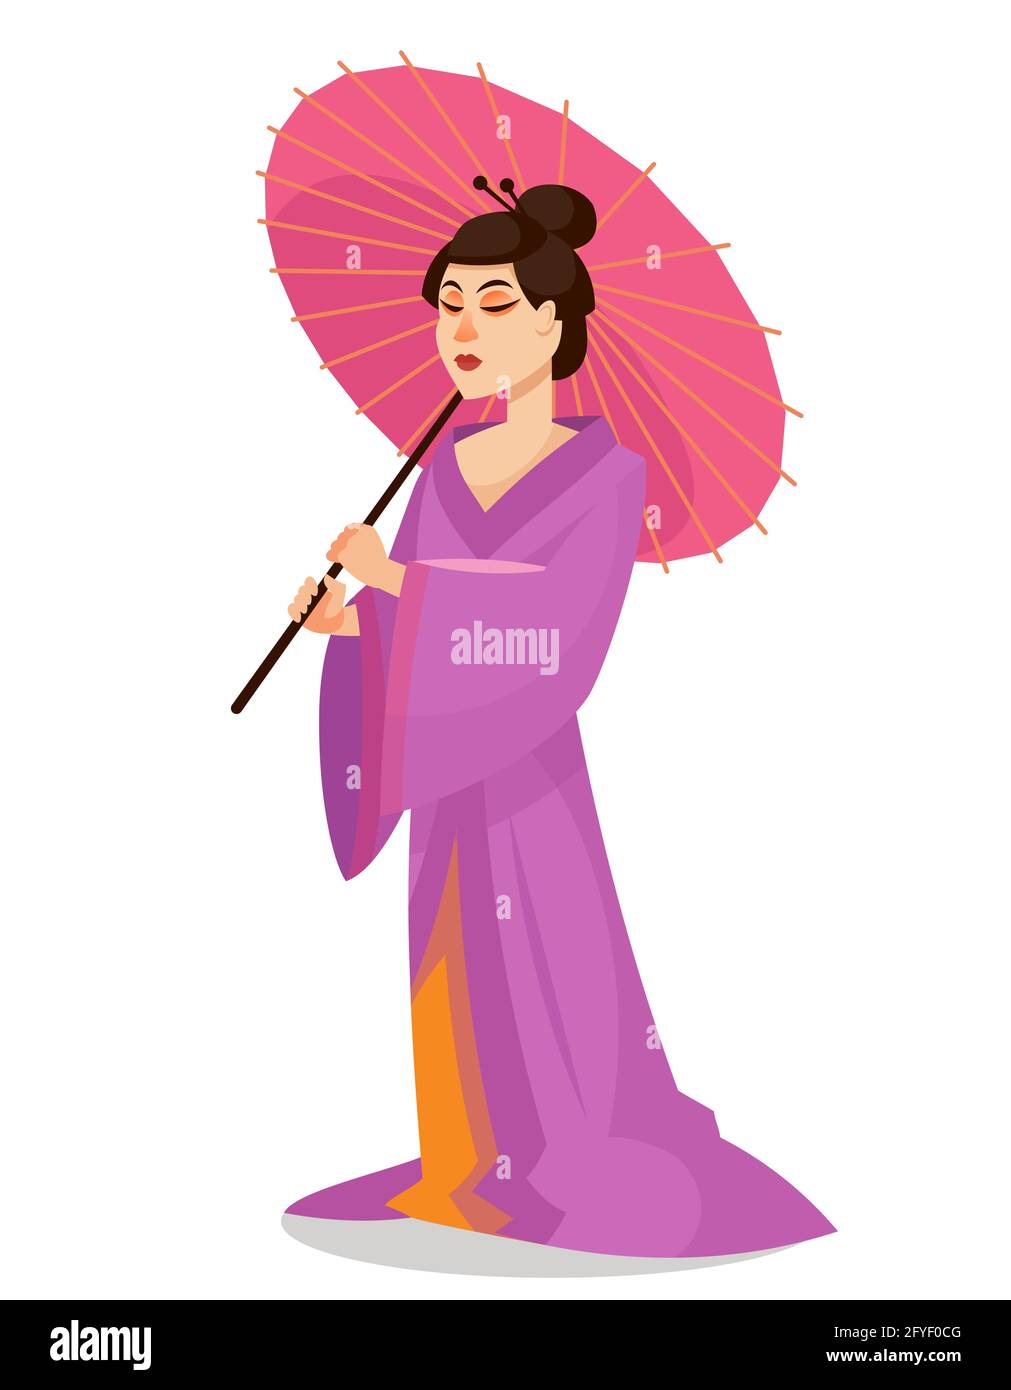 Kimono and accessories Stock Vector Images - Alamy